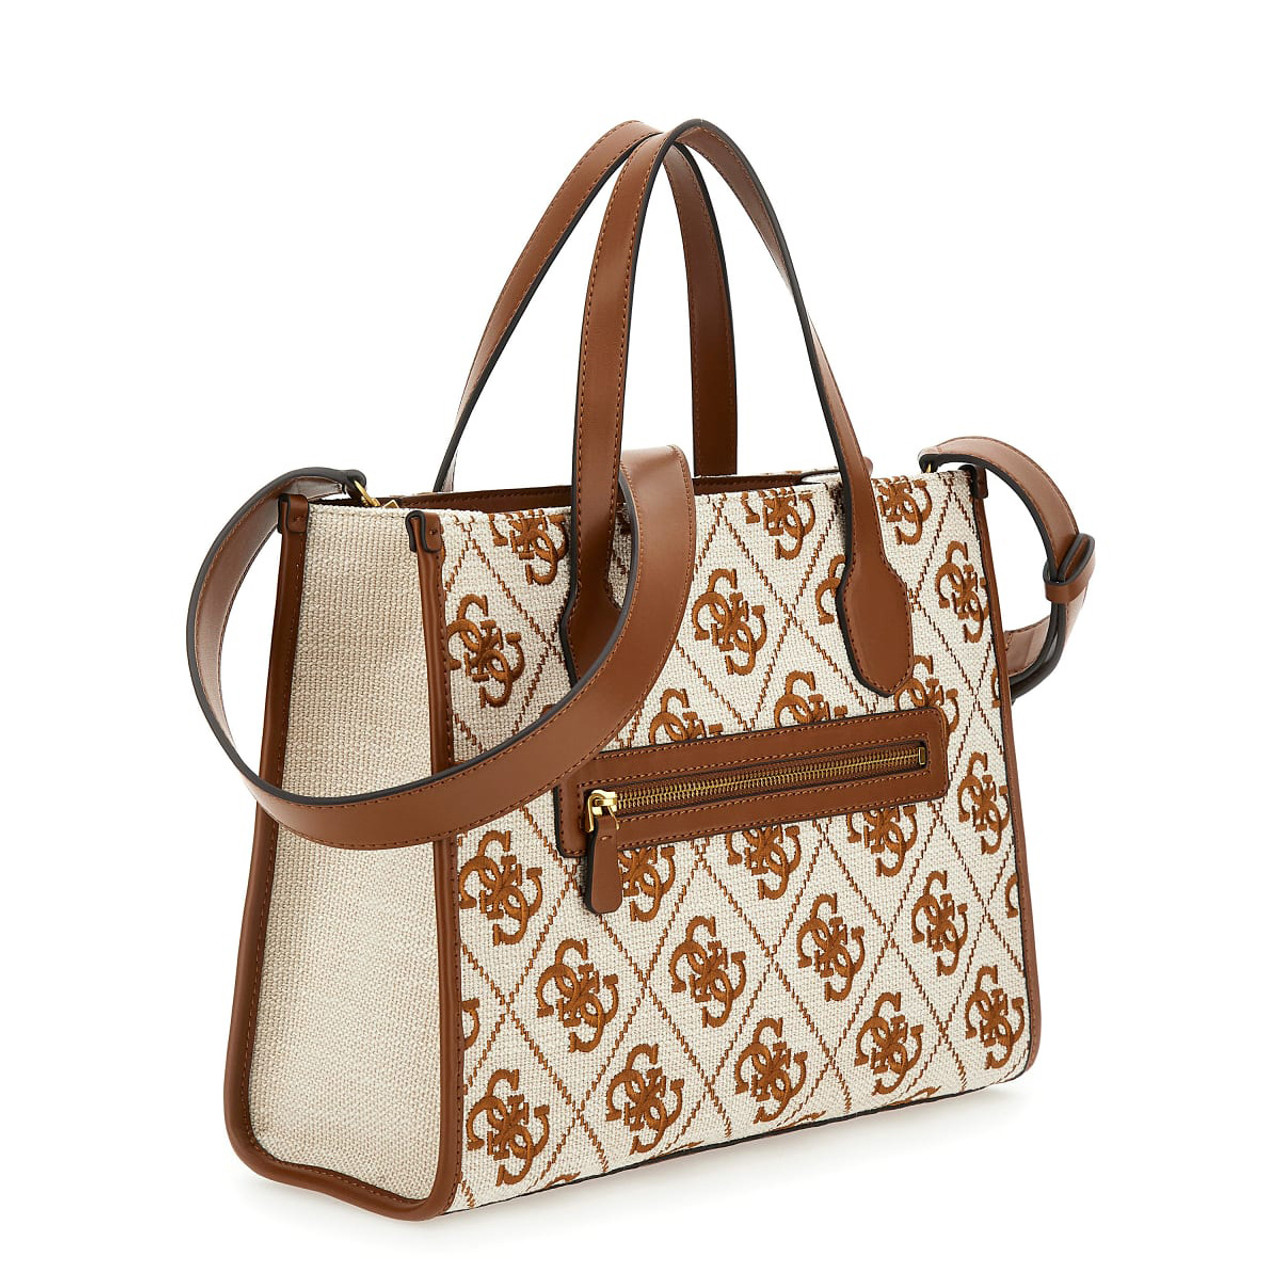 Guess Silvana 2 Compartment Tote in Natural